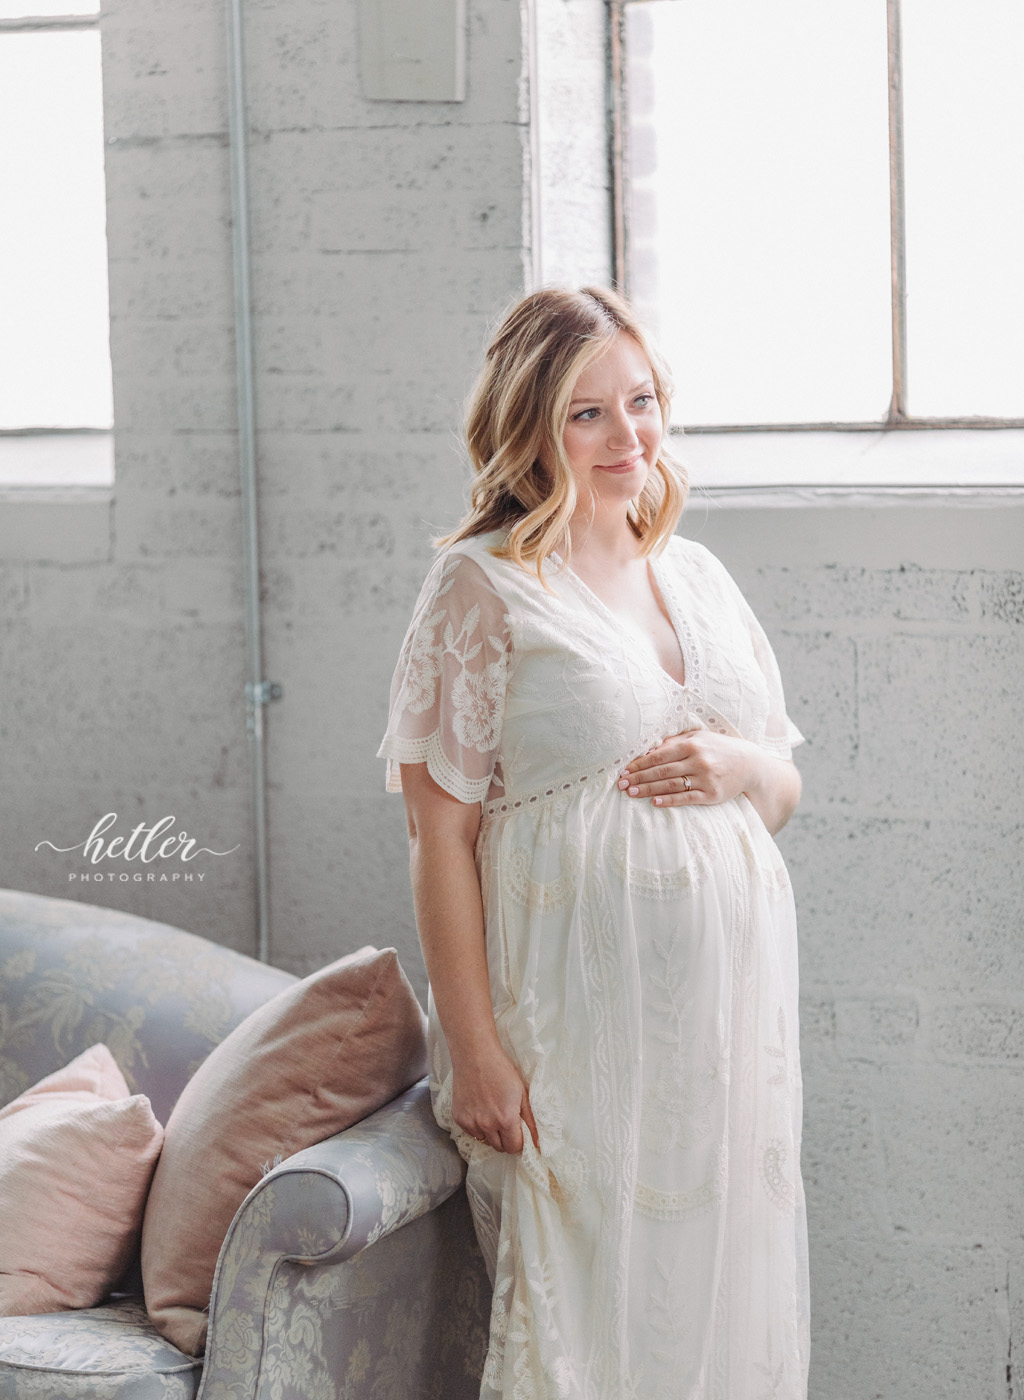 Grand Rapids maternity photos at a natural light studio with mom in a beautiful white dress